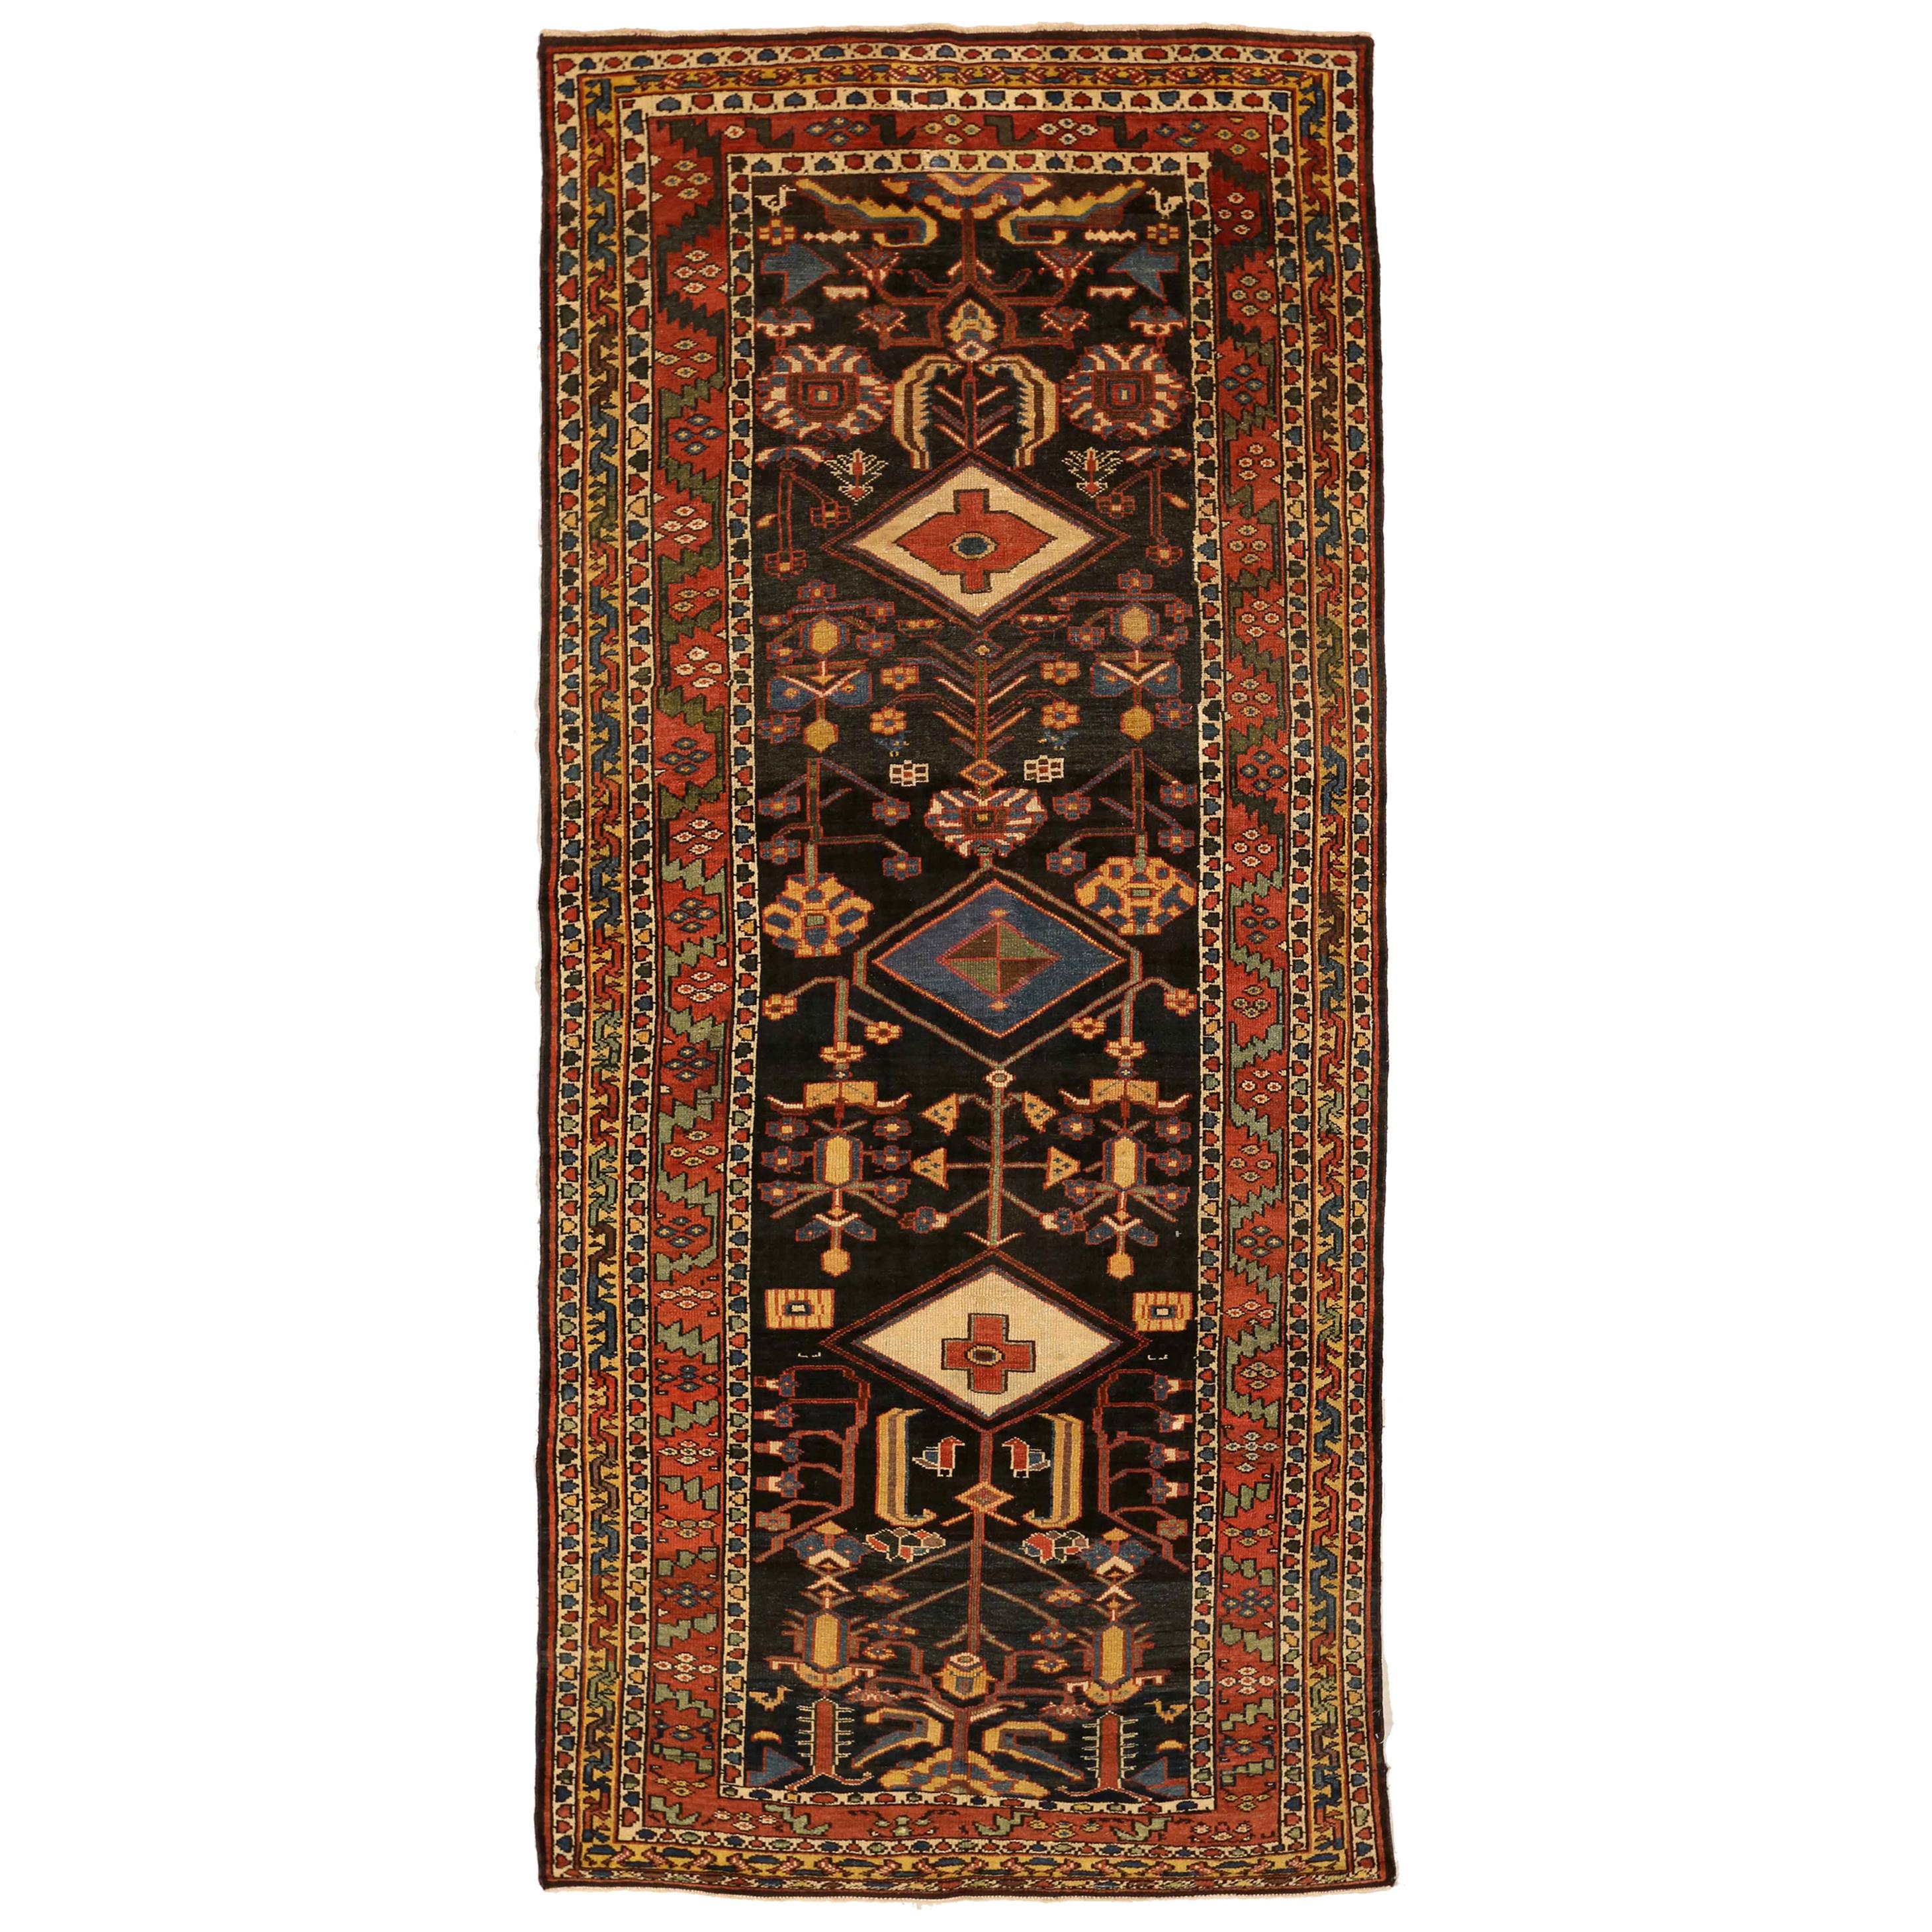 Antique Persian Bakhtiar Rug with Red, Blue and Ivory Diamond Central Medallions